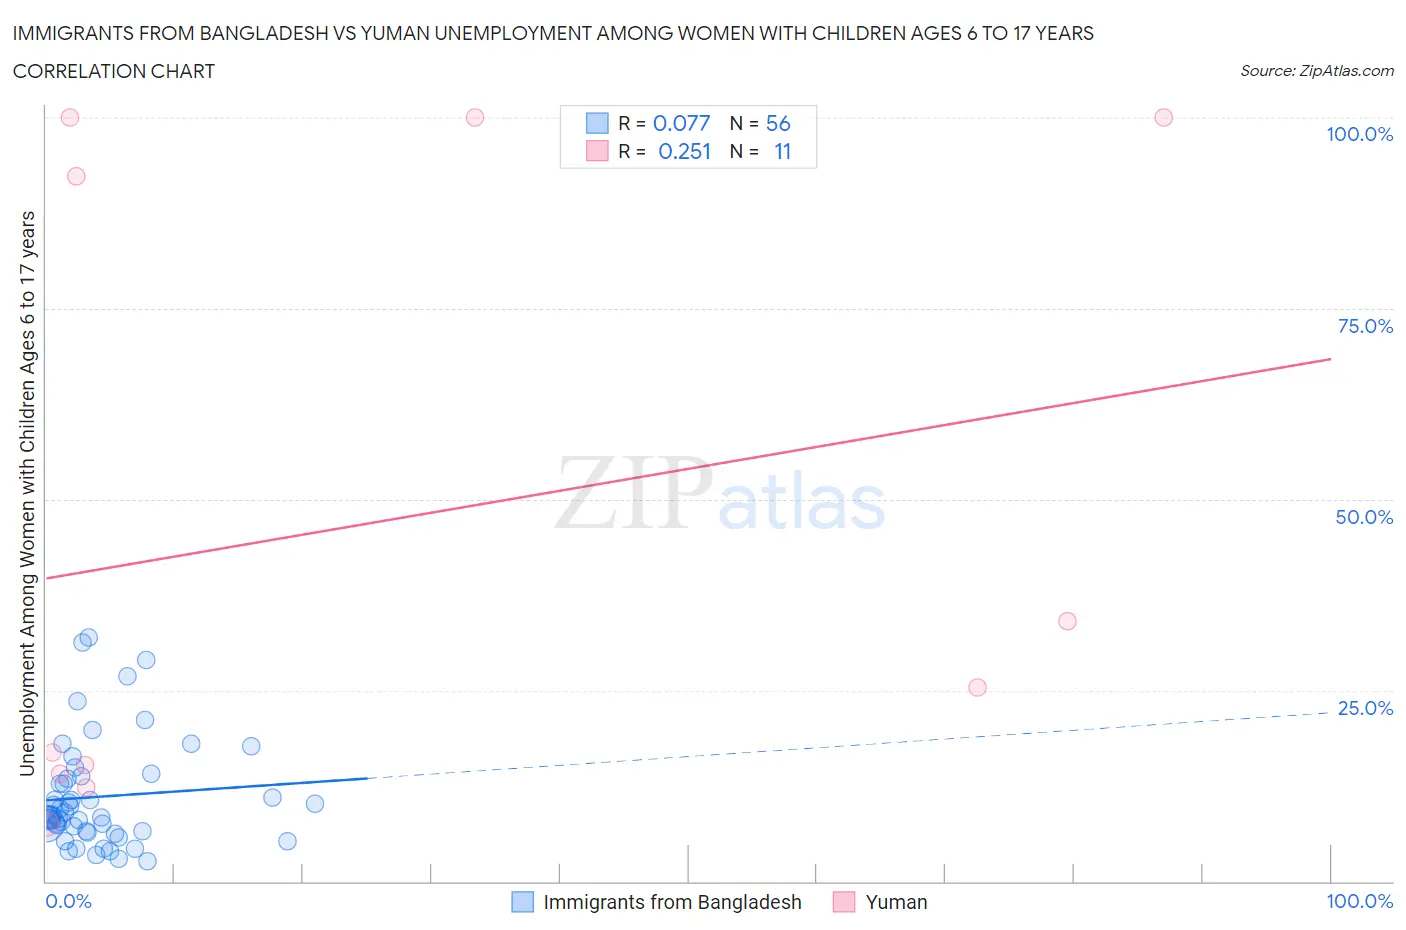 Immigrants from Bangladesh vs Yuman Unemployment Among Women with Children Ages 6 to 17 years